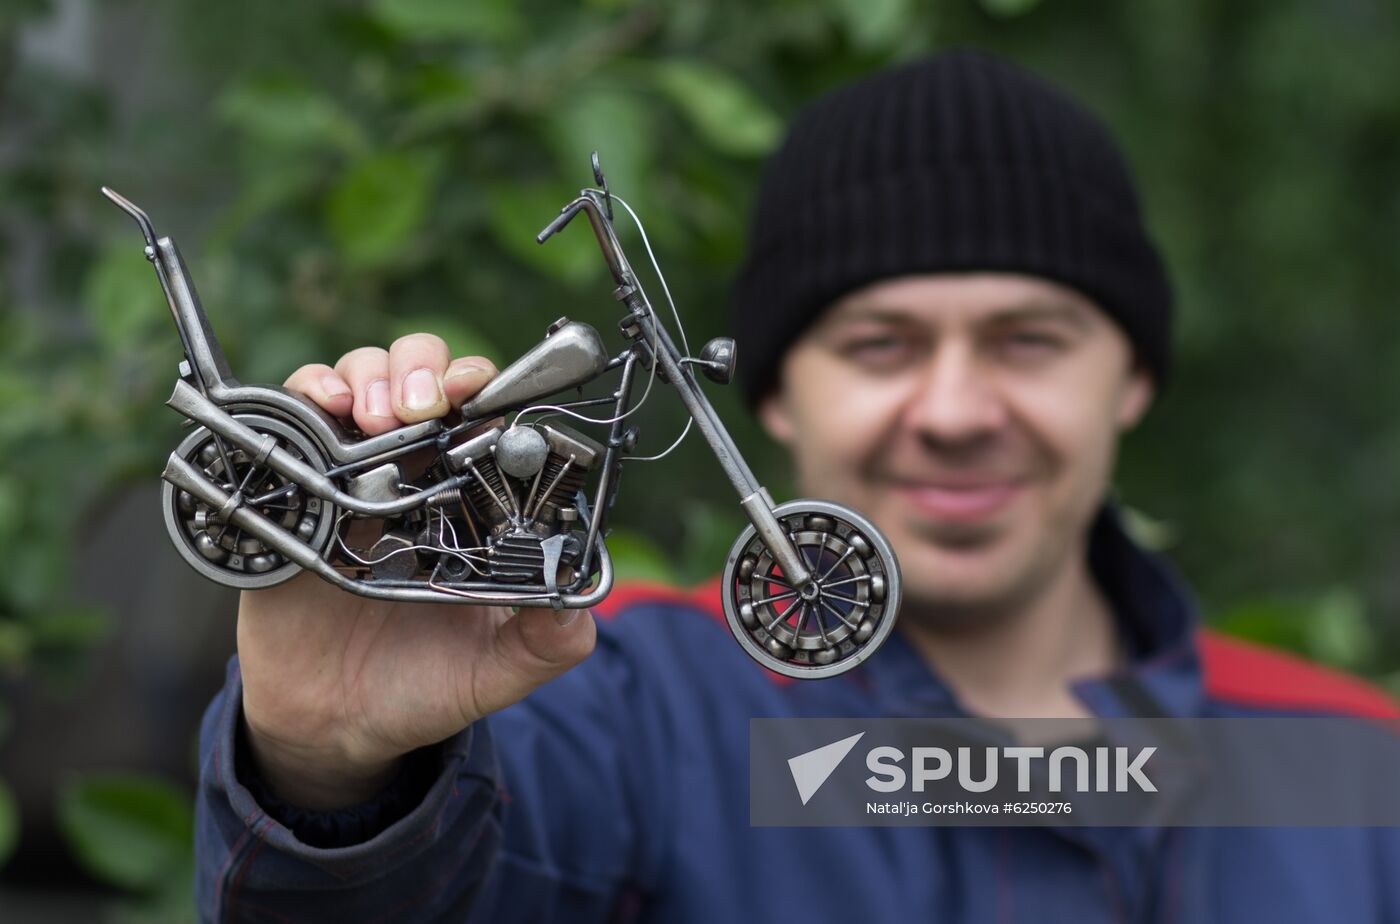 Russia Scaled Motorcycle Models